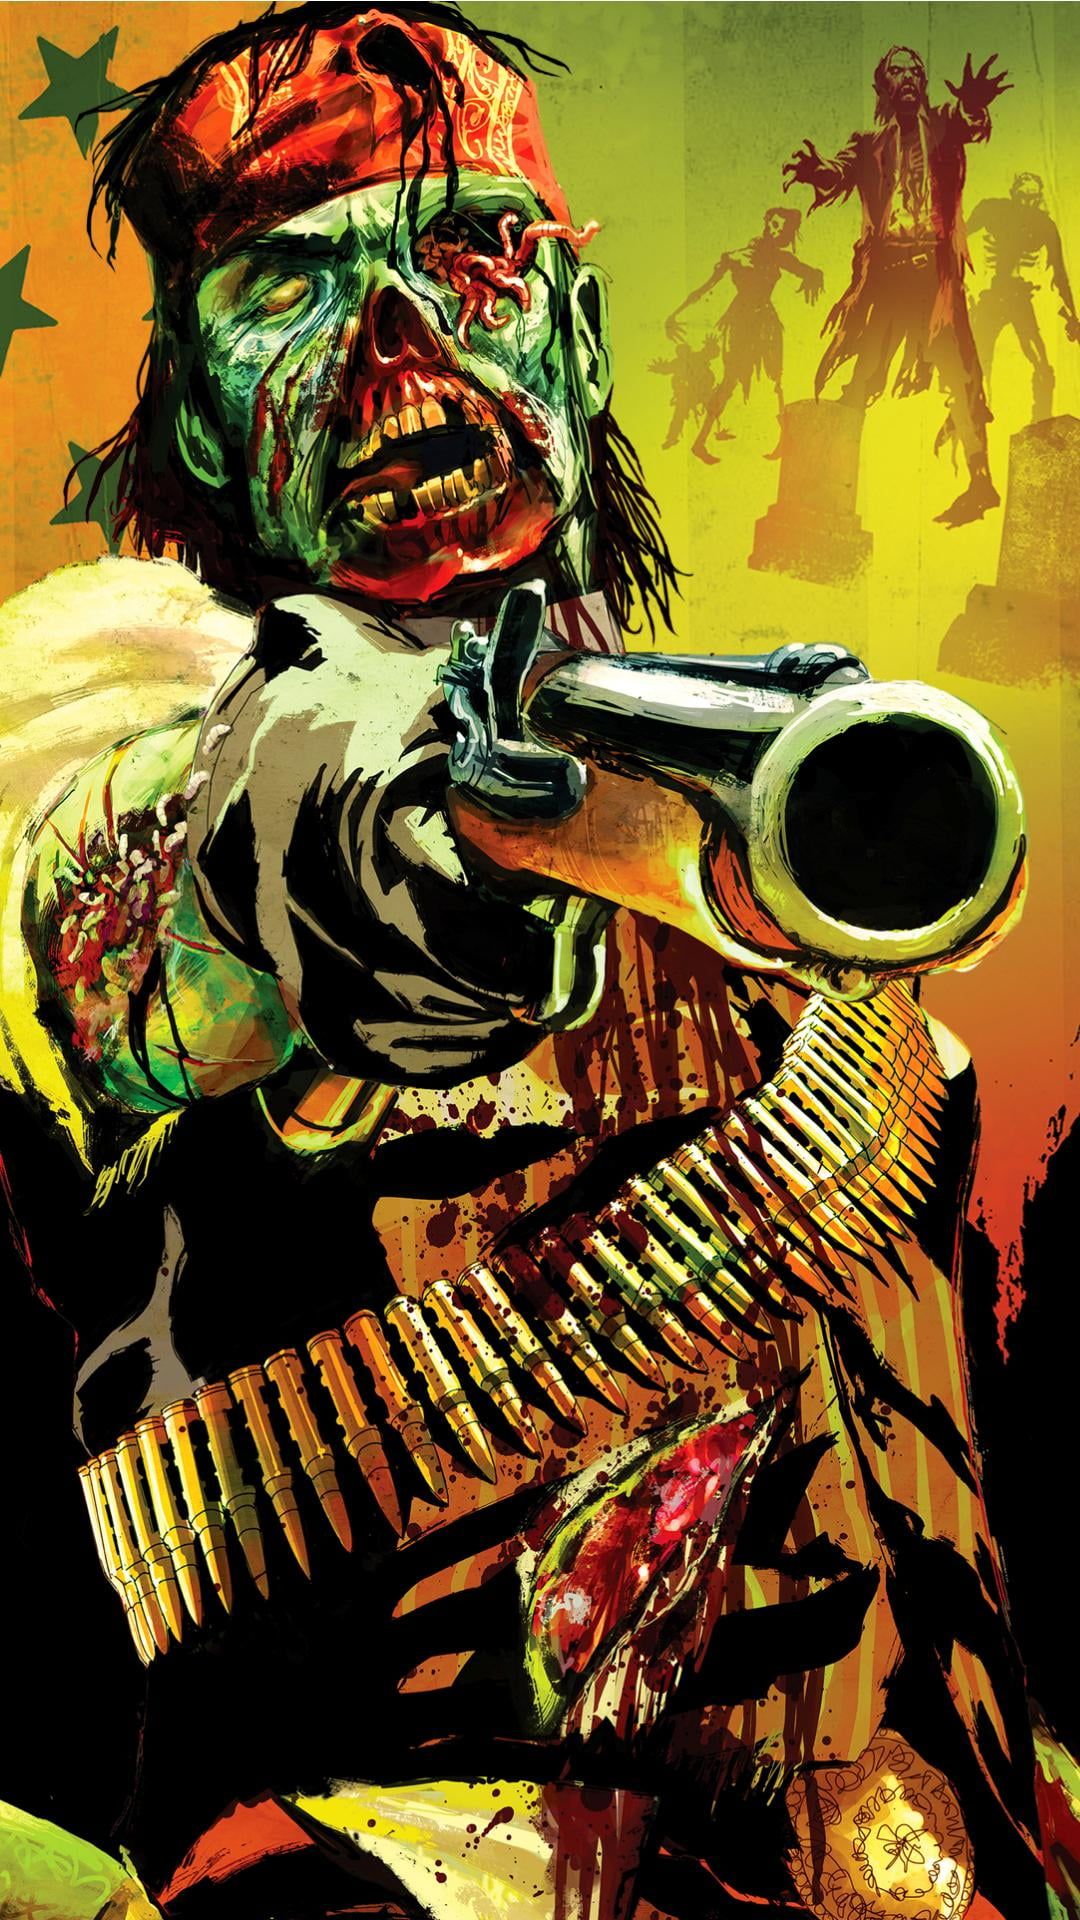 Red Dead Redemption Undead Nightmare Wallpapers